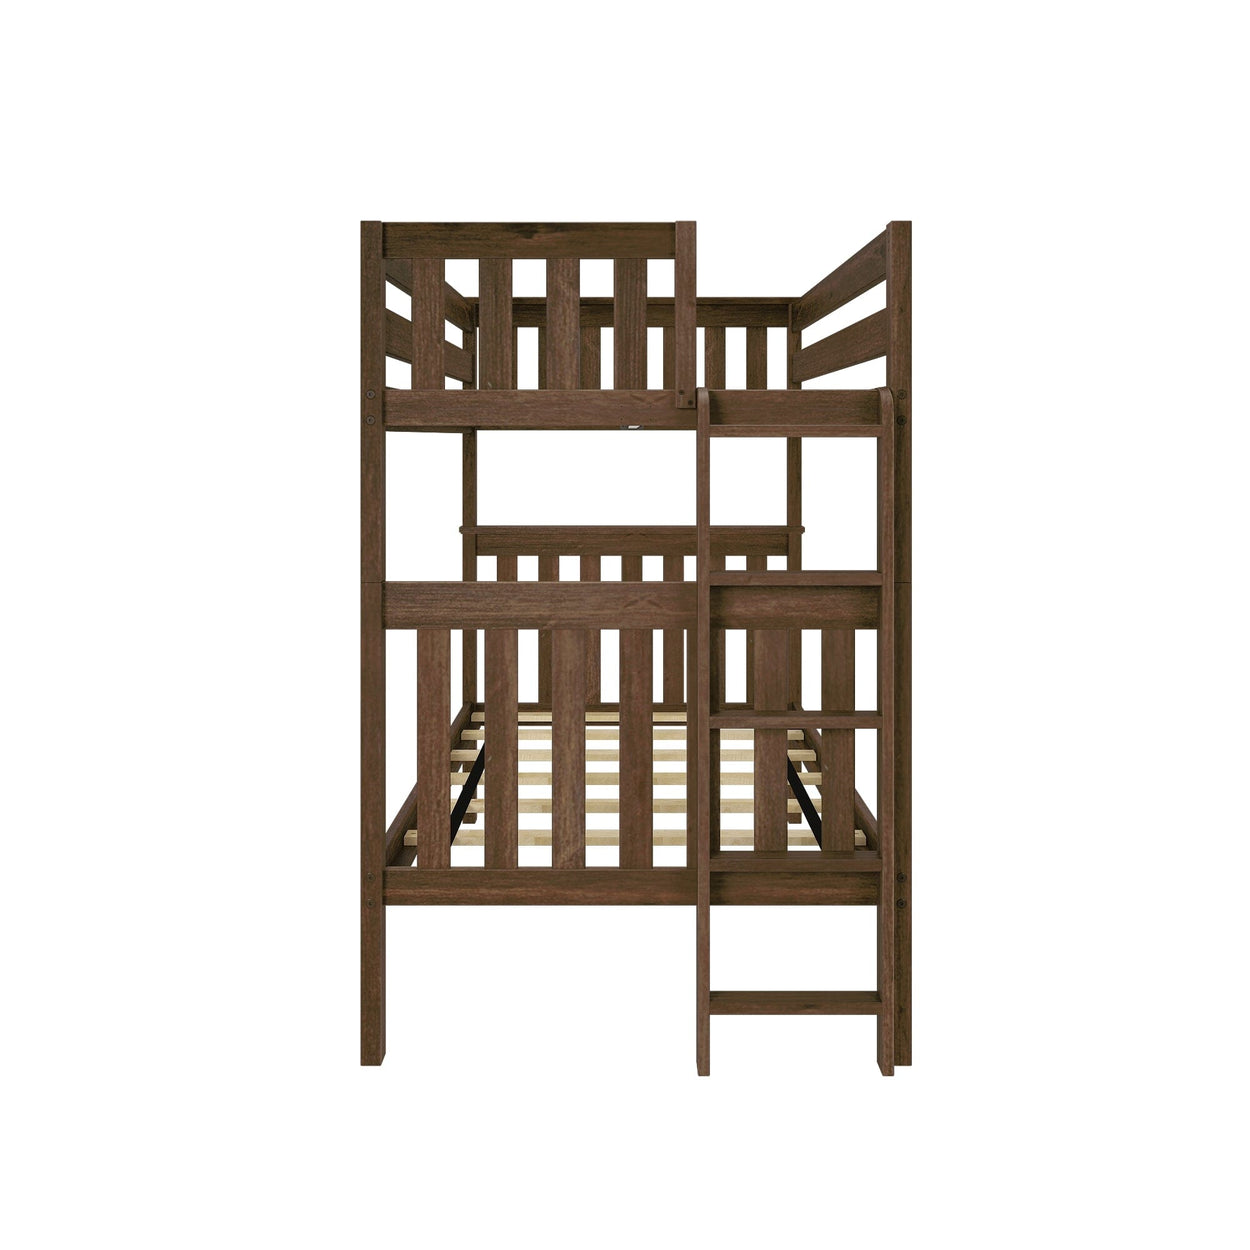 185305-008 : Bunk Beds Twin over Twin Bunk Bed with Ladder on End, Walnut